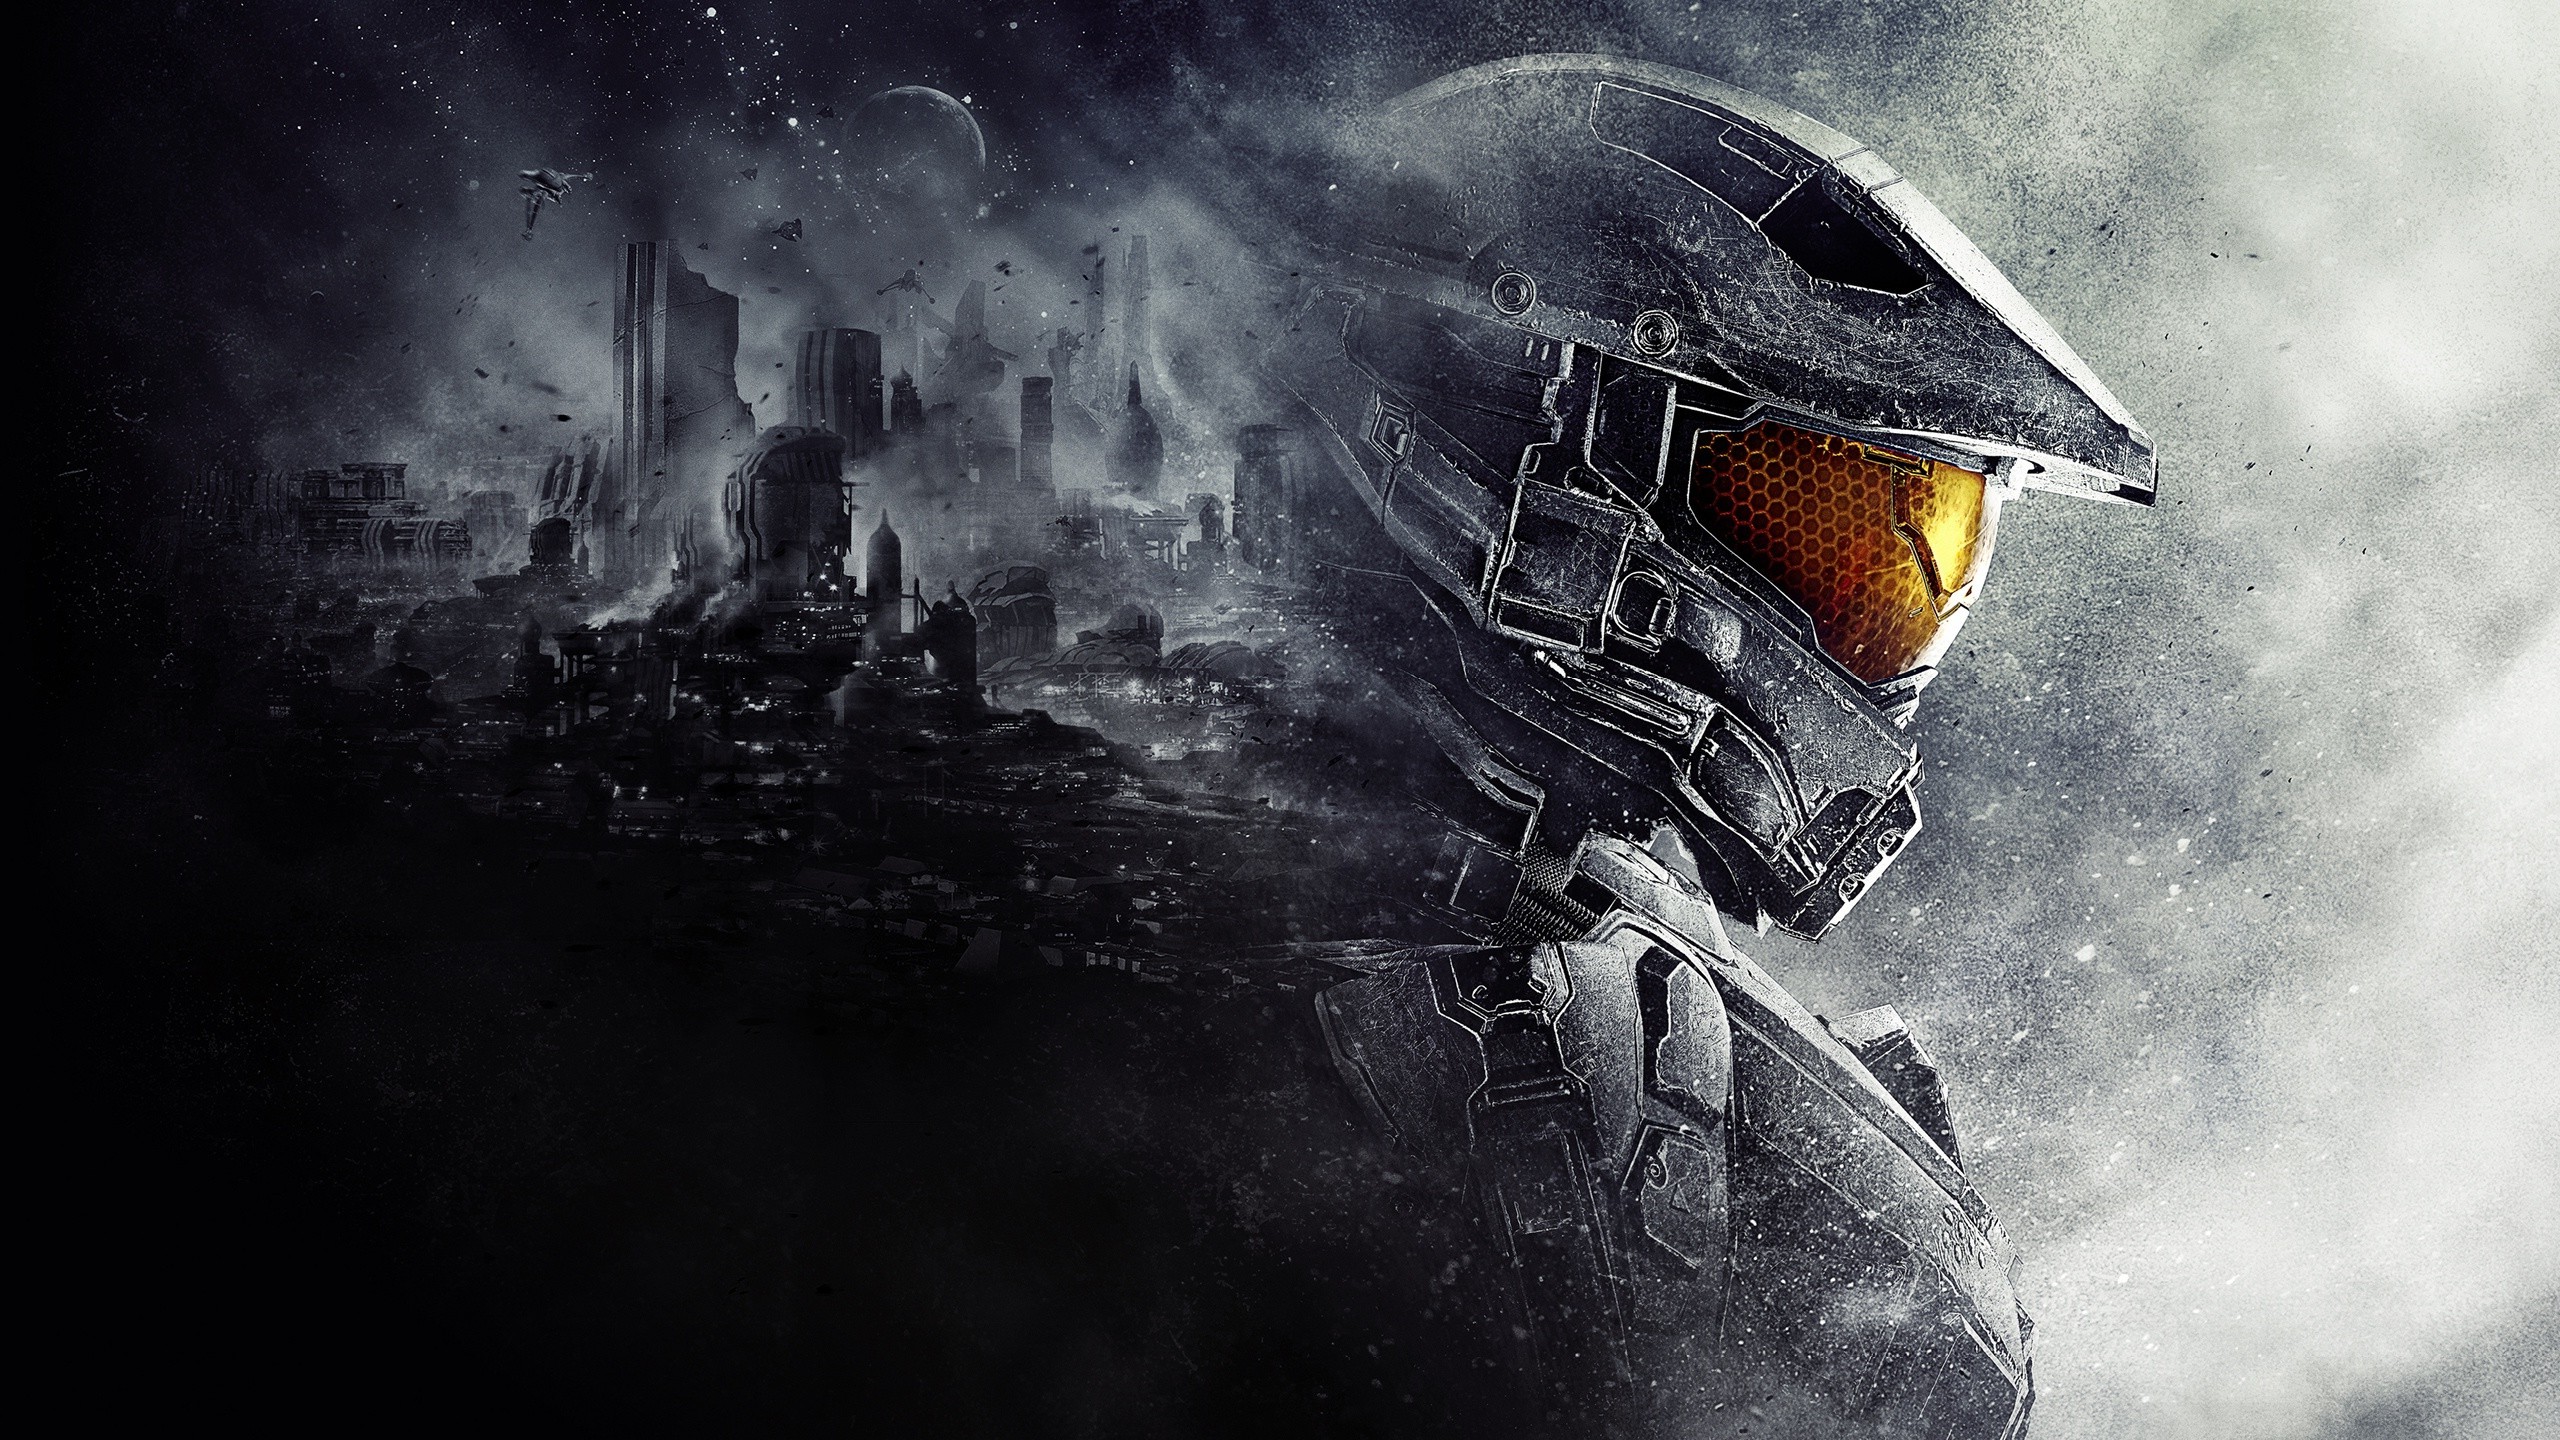 Halo 5, Master Chief, Halo, 343 Industries, Video Games Wallpaper